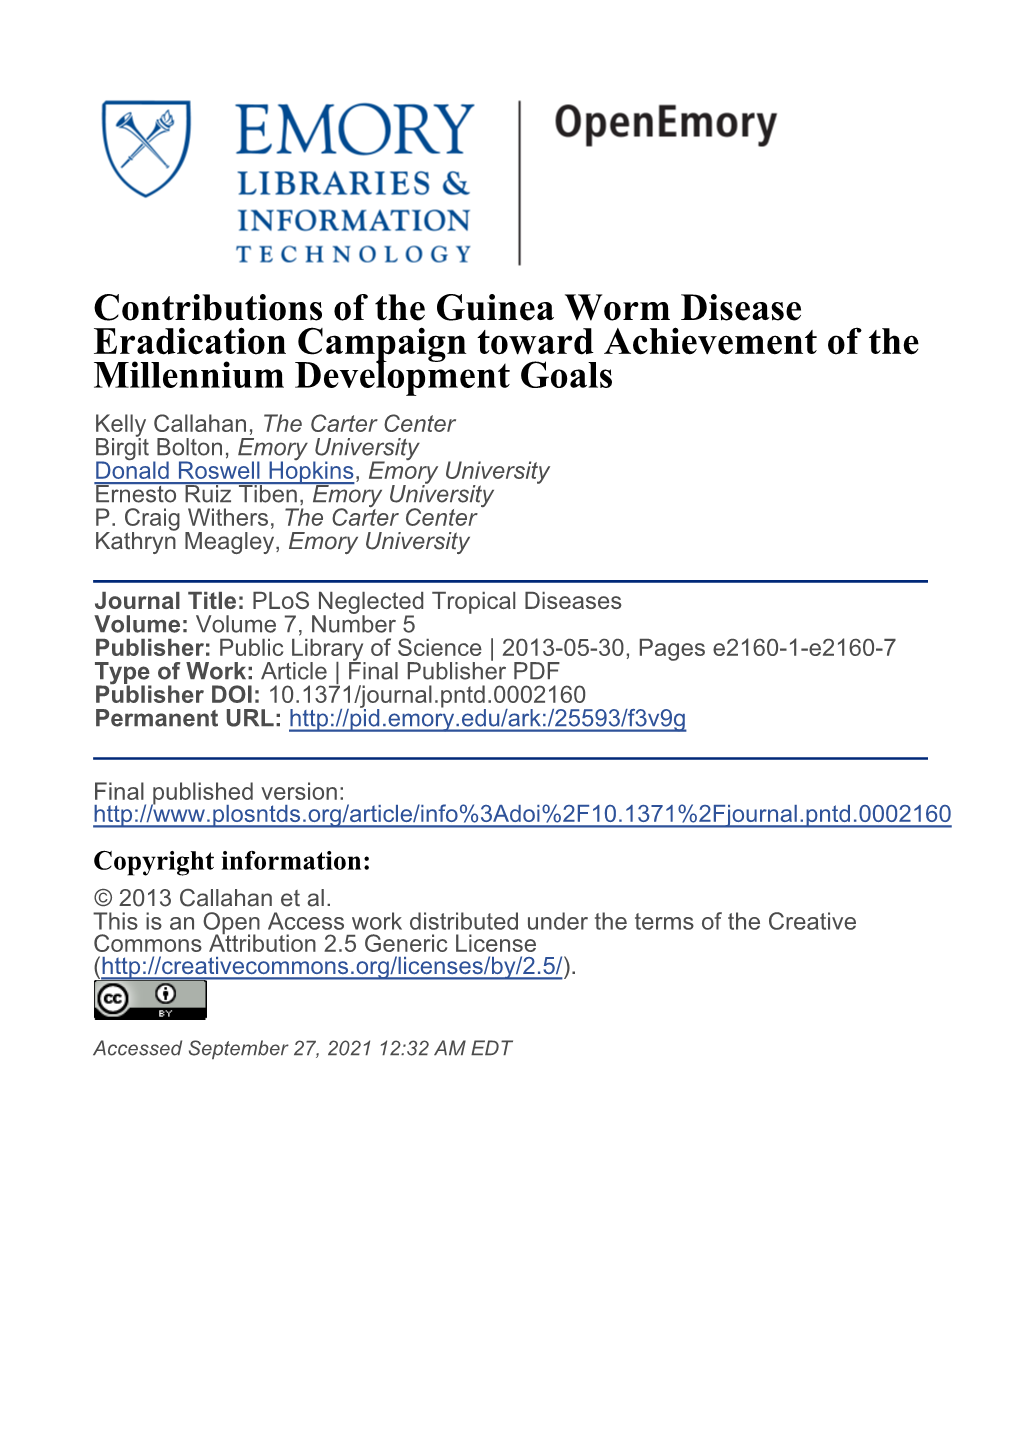 Contributions of the Guinea Worm Disease Eradication Campaign